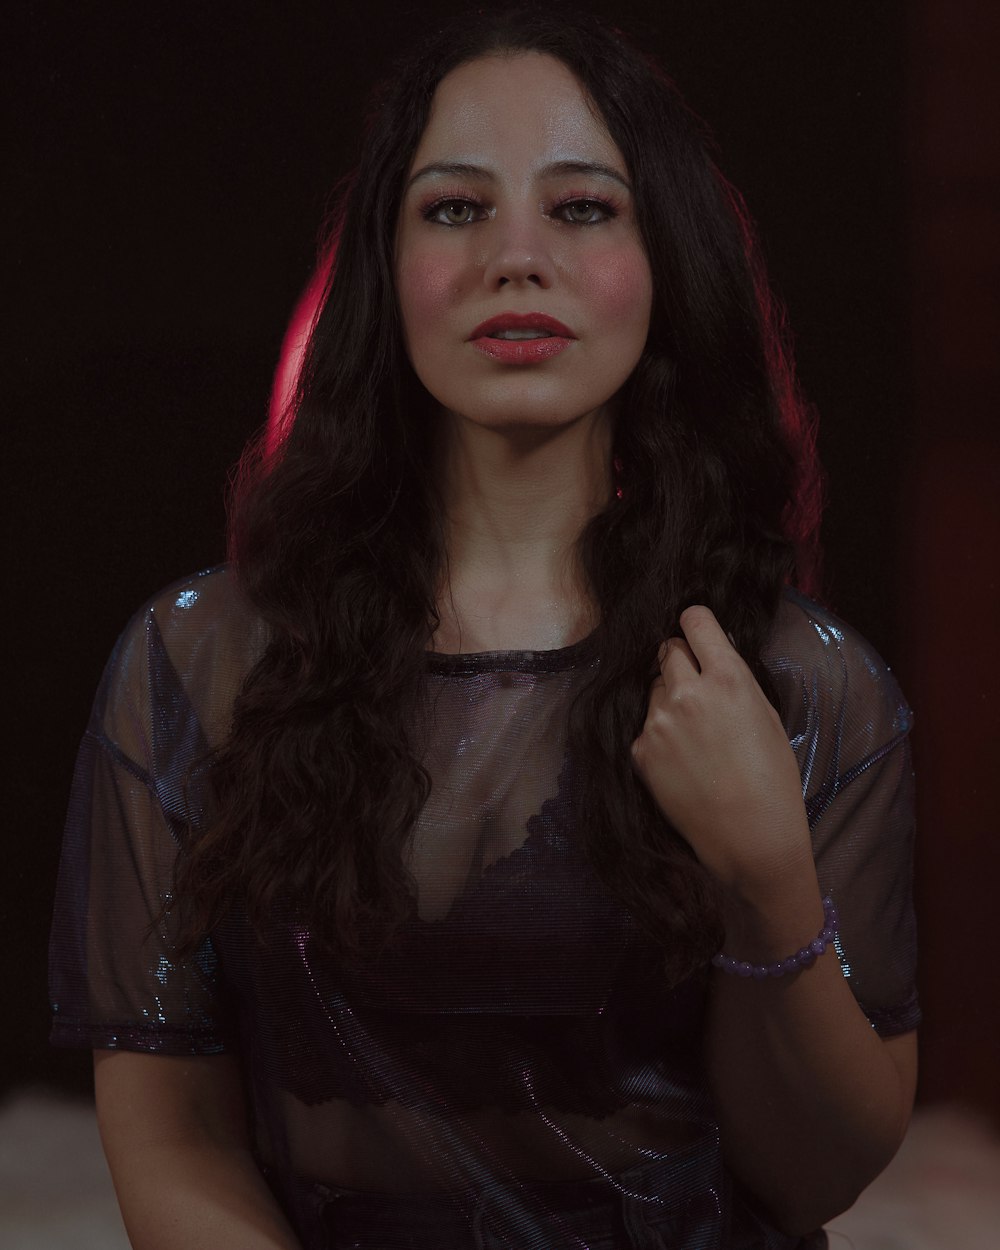 a woman with long dark hair wearing a sheer top